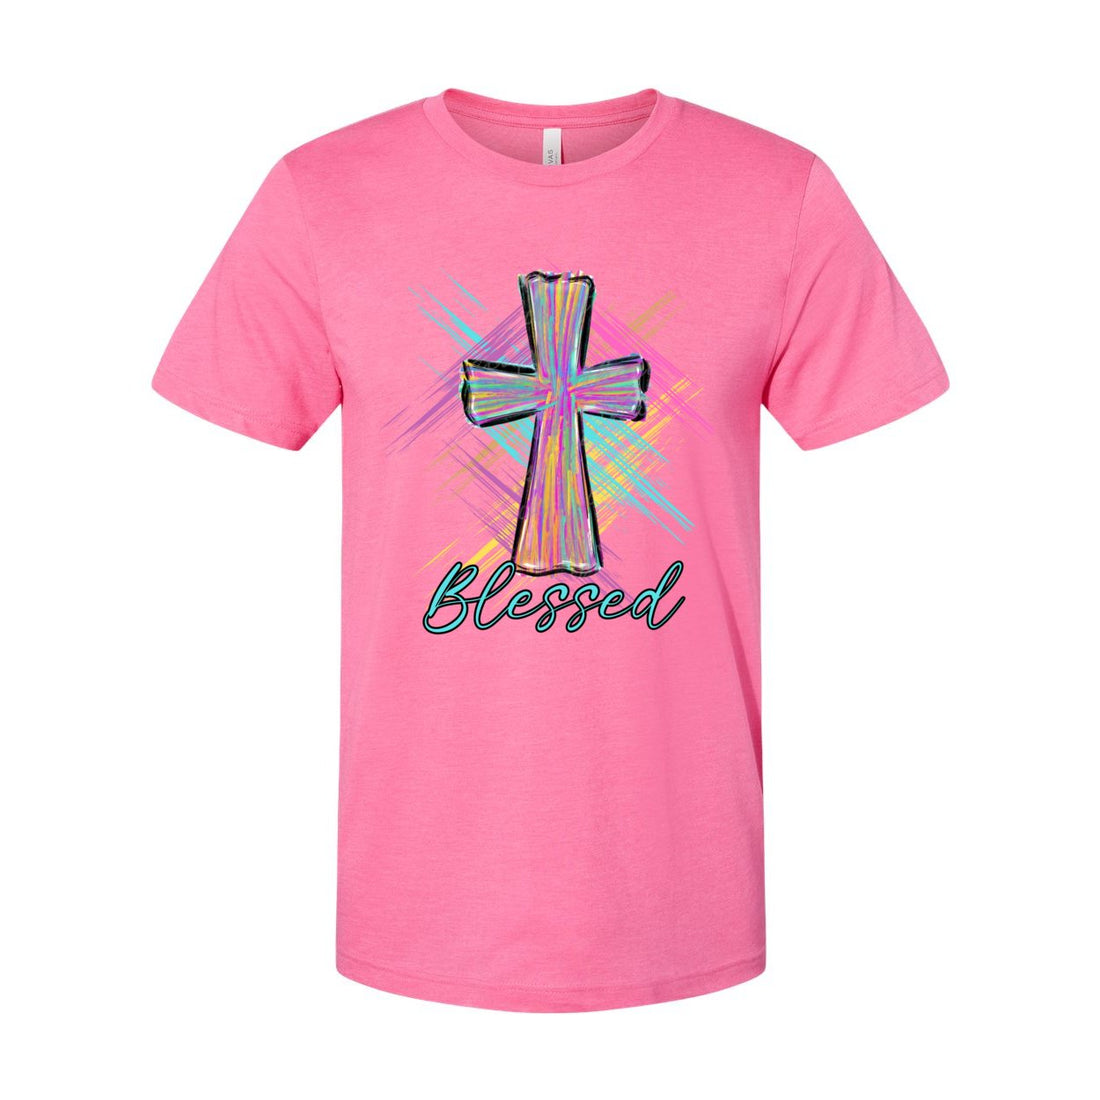 Blessed Brush Stroke Tee - T-Shirts - Positively Sassy - Blessed Brush Stroke Tee